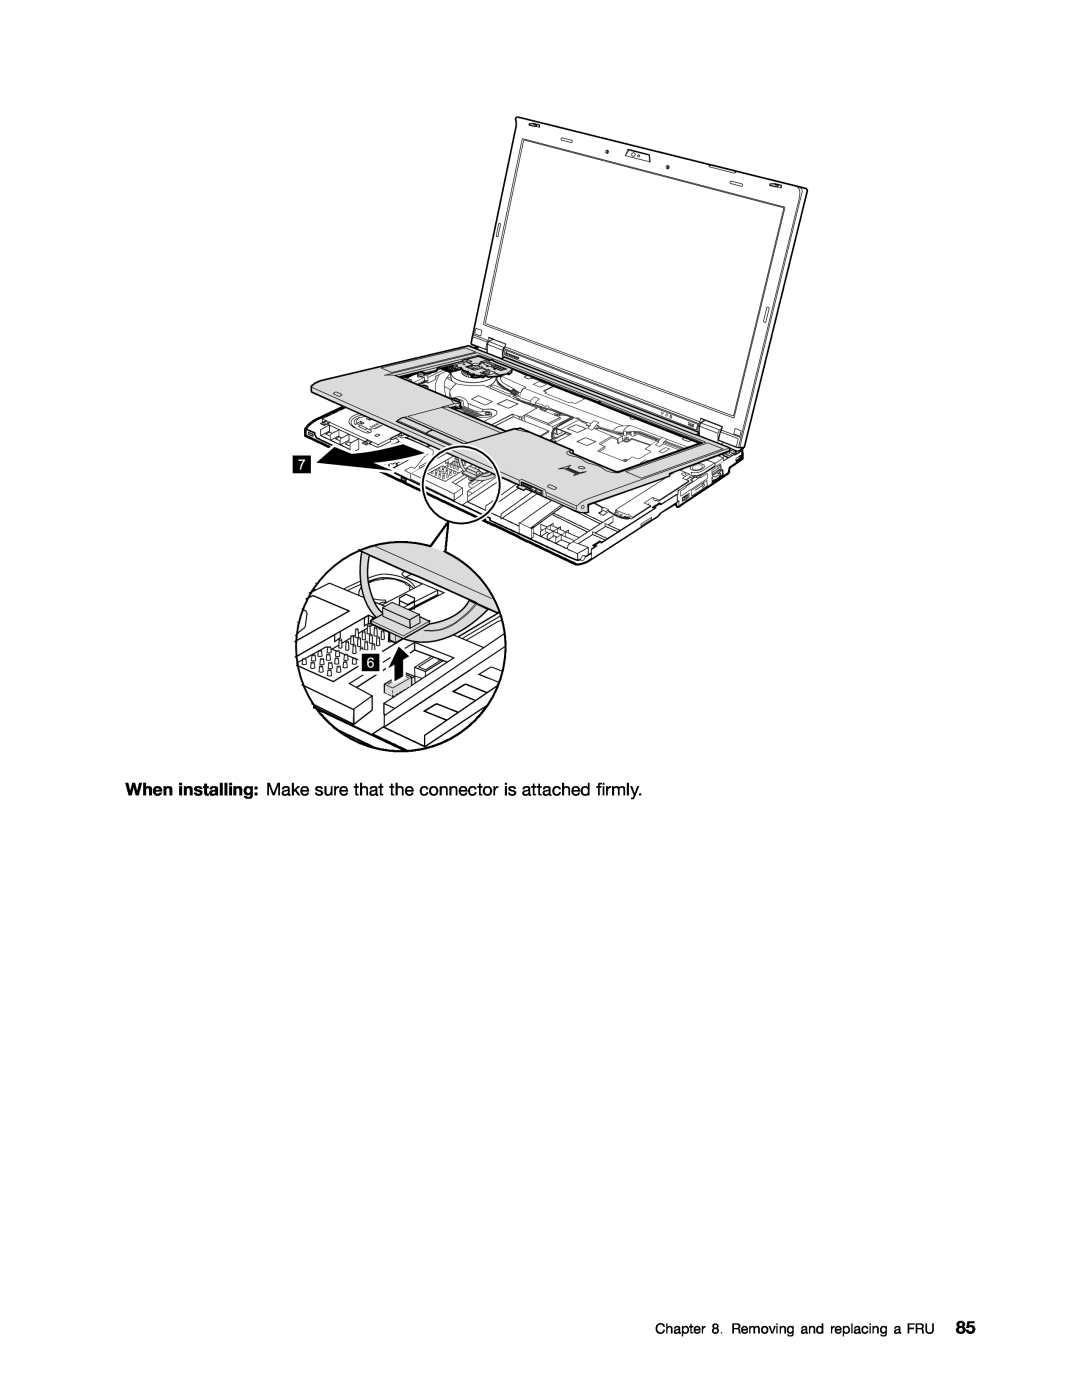 Lenovo T420i manual When installing Make sure that the connector is attached firmly, Removing and replacing a FRU 